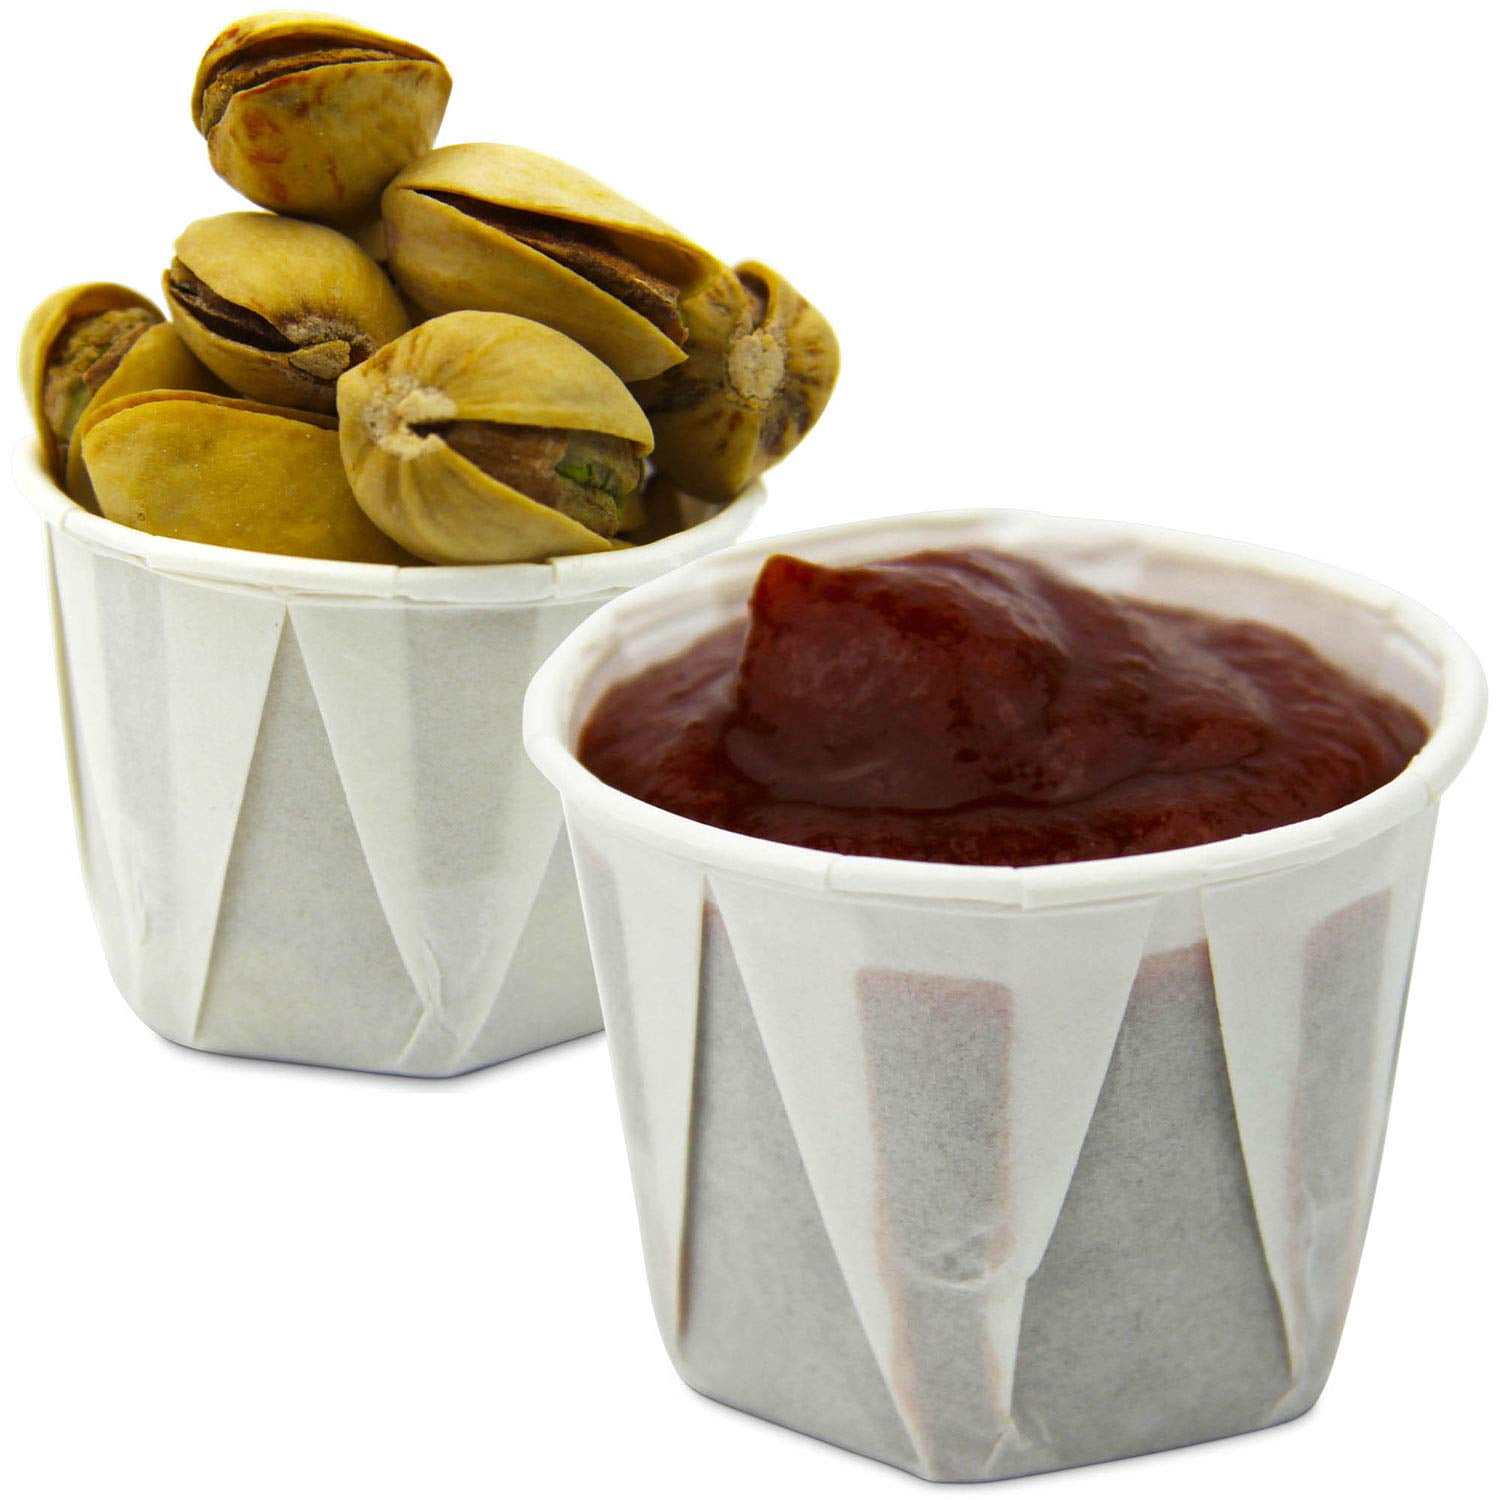 Treated Paper Souffle Portion Cups for Condiments Shots Sauce White 500 Pack 2oz 